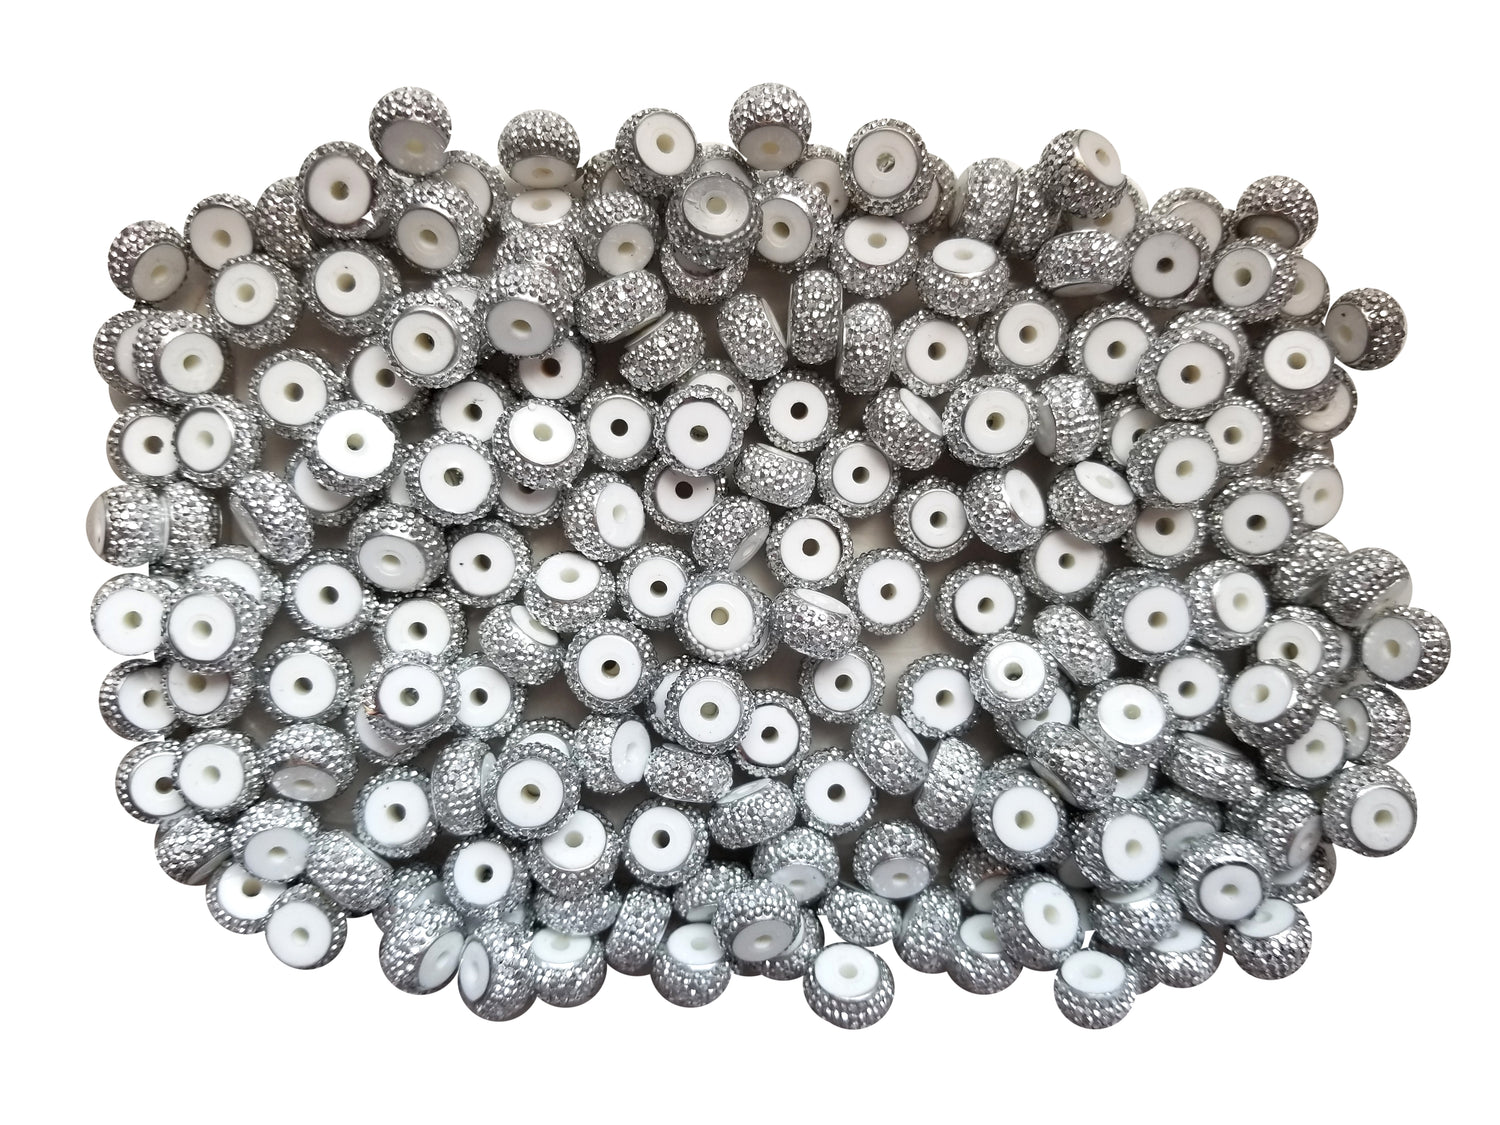 Aylifu Rondelle Spacer Beads, 400 Pieces Round Crystal Rondelle Spacer  Charm Beads with Clear Czech Crystal 6mm 8mm 10mm for